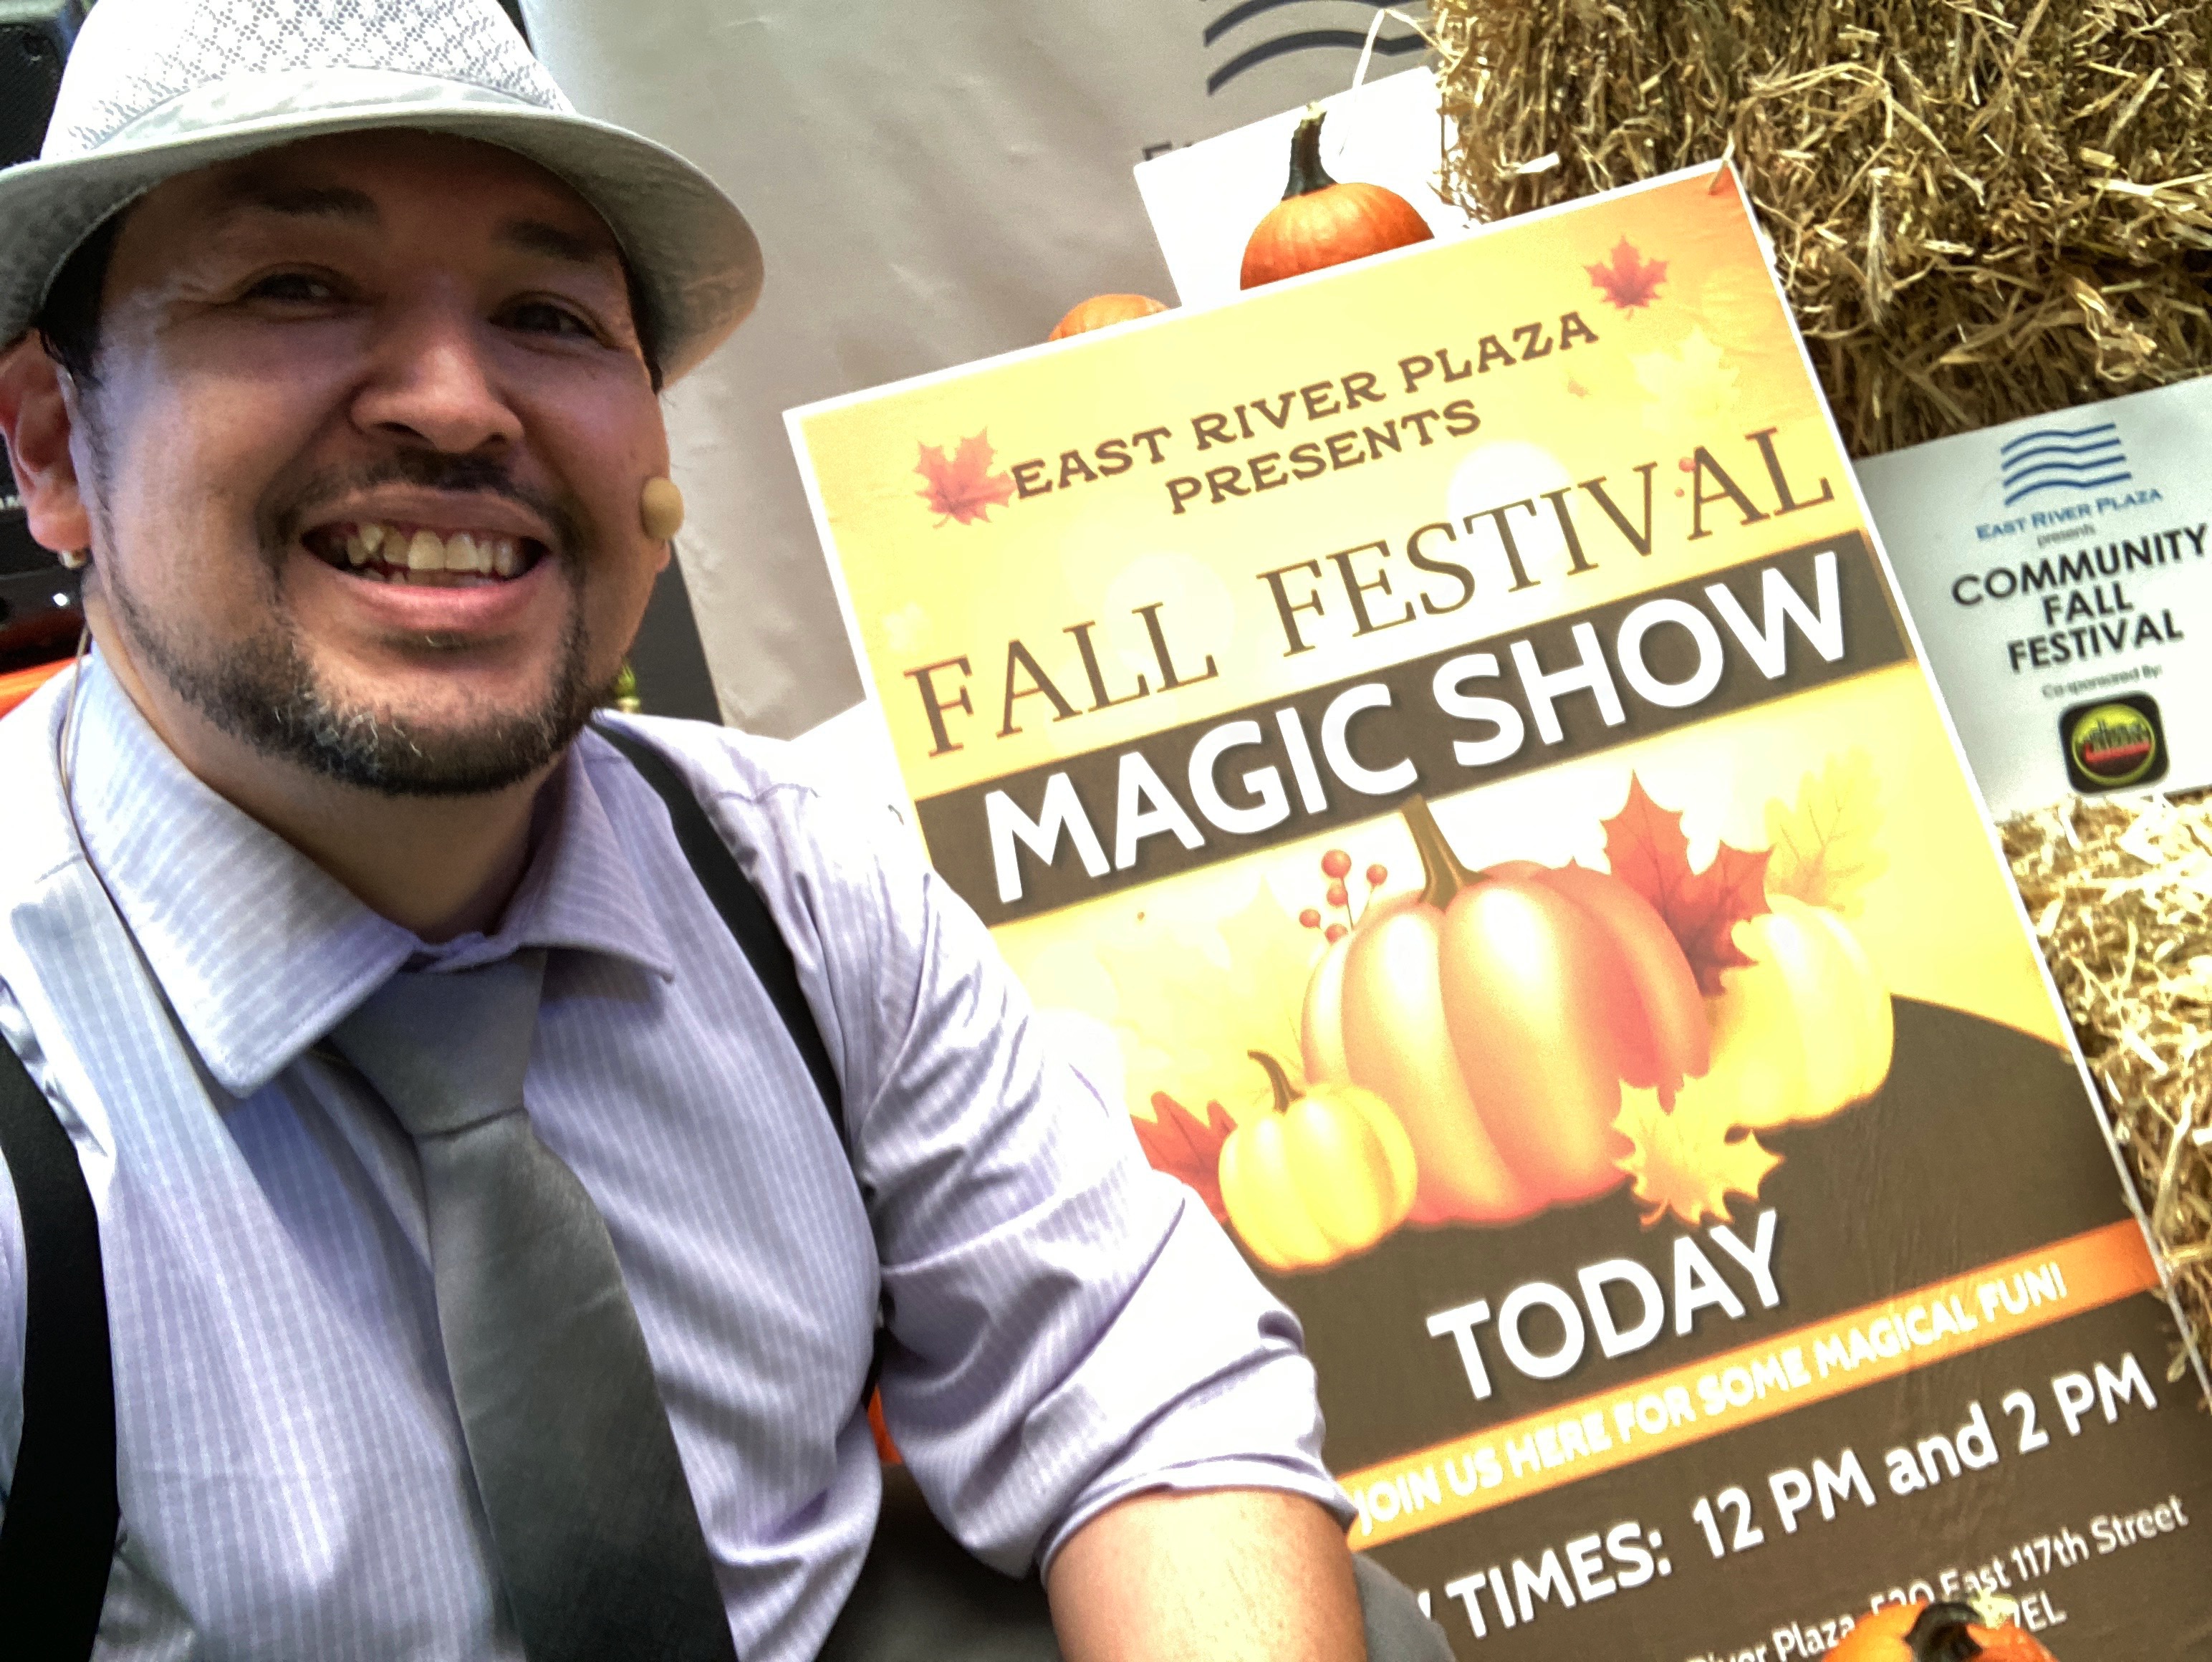 Public Magic Show for fall festival in NYC